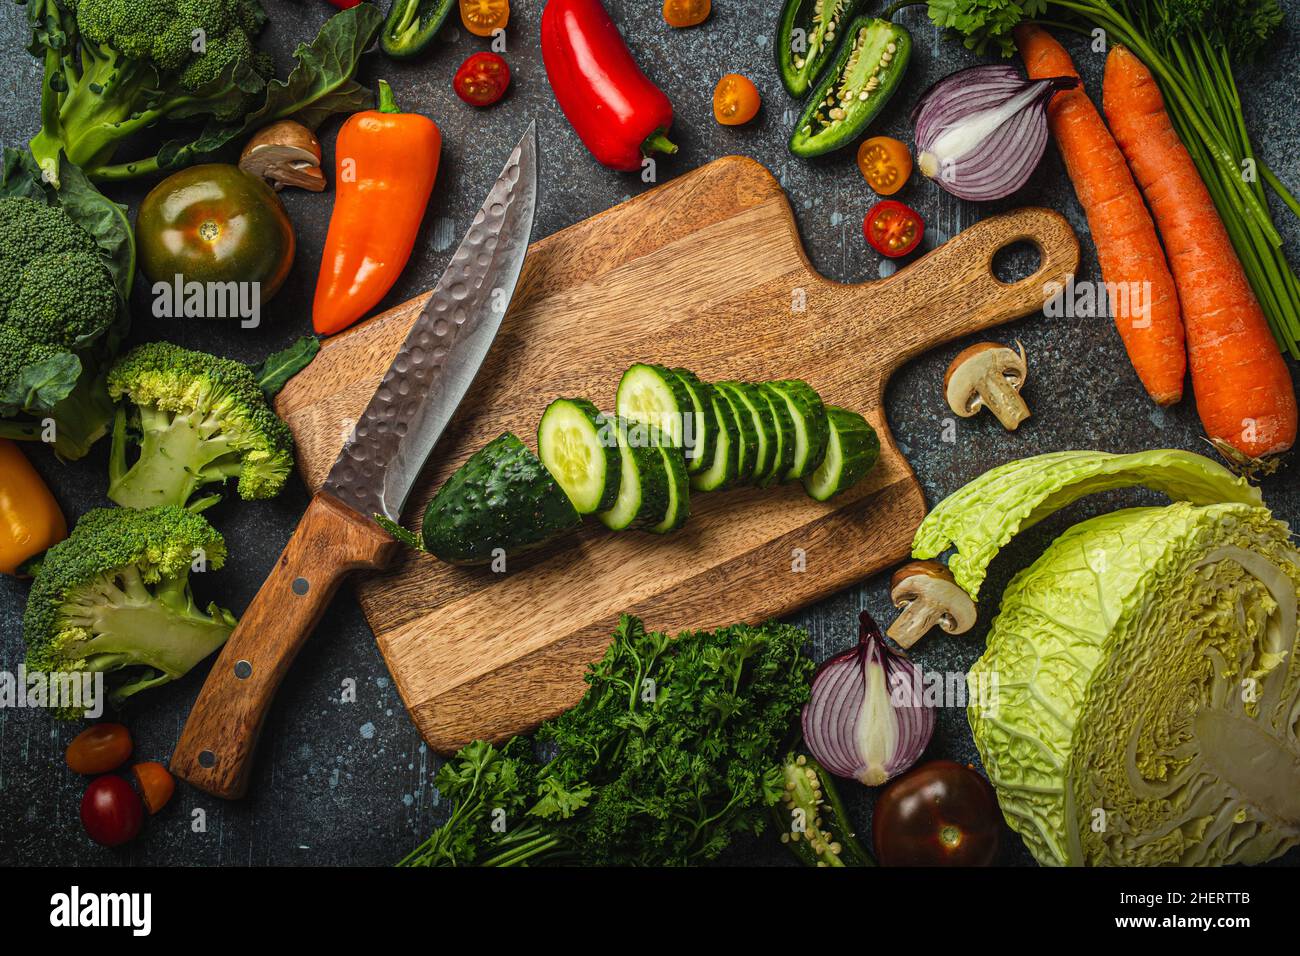 Chopped cucumber on wooden cutting board with knife and assorted fresh vegetables Stock Photo